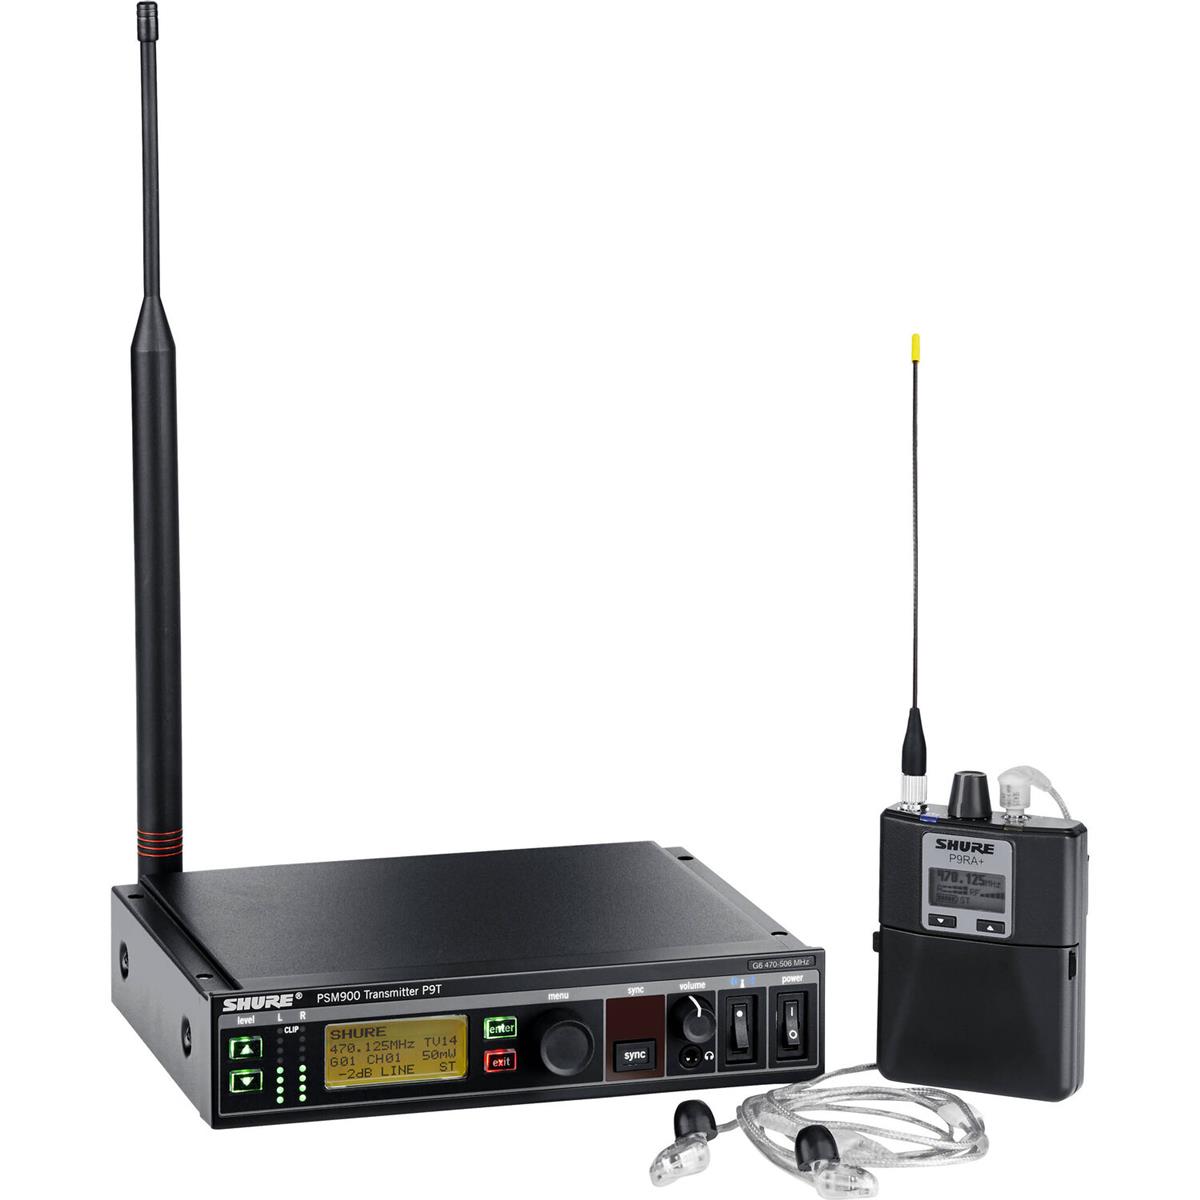 Image of Shure PSM 900 Wireless Personal Monitor System with SE425 PRO Sound Earphone H21: 542-578MHz